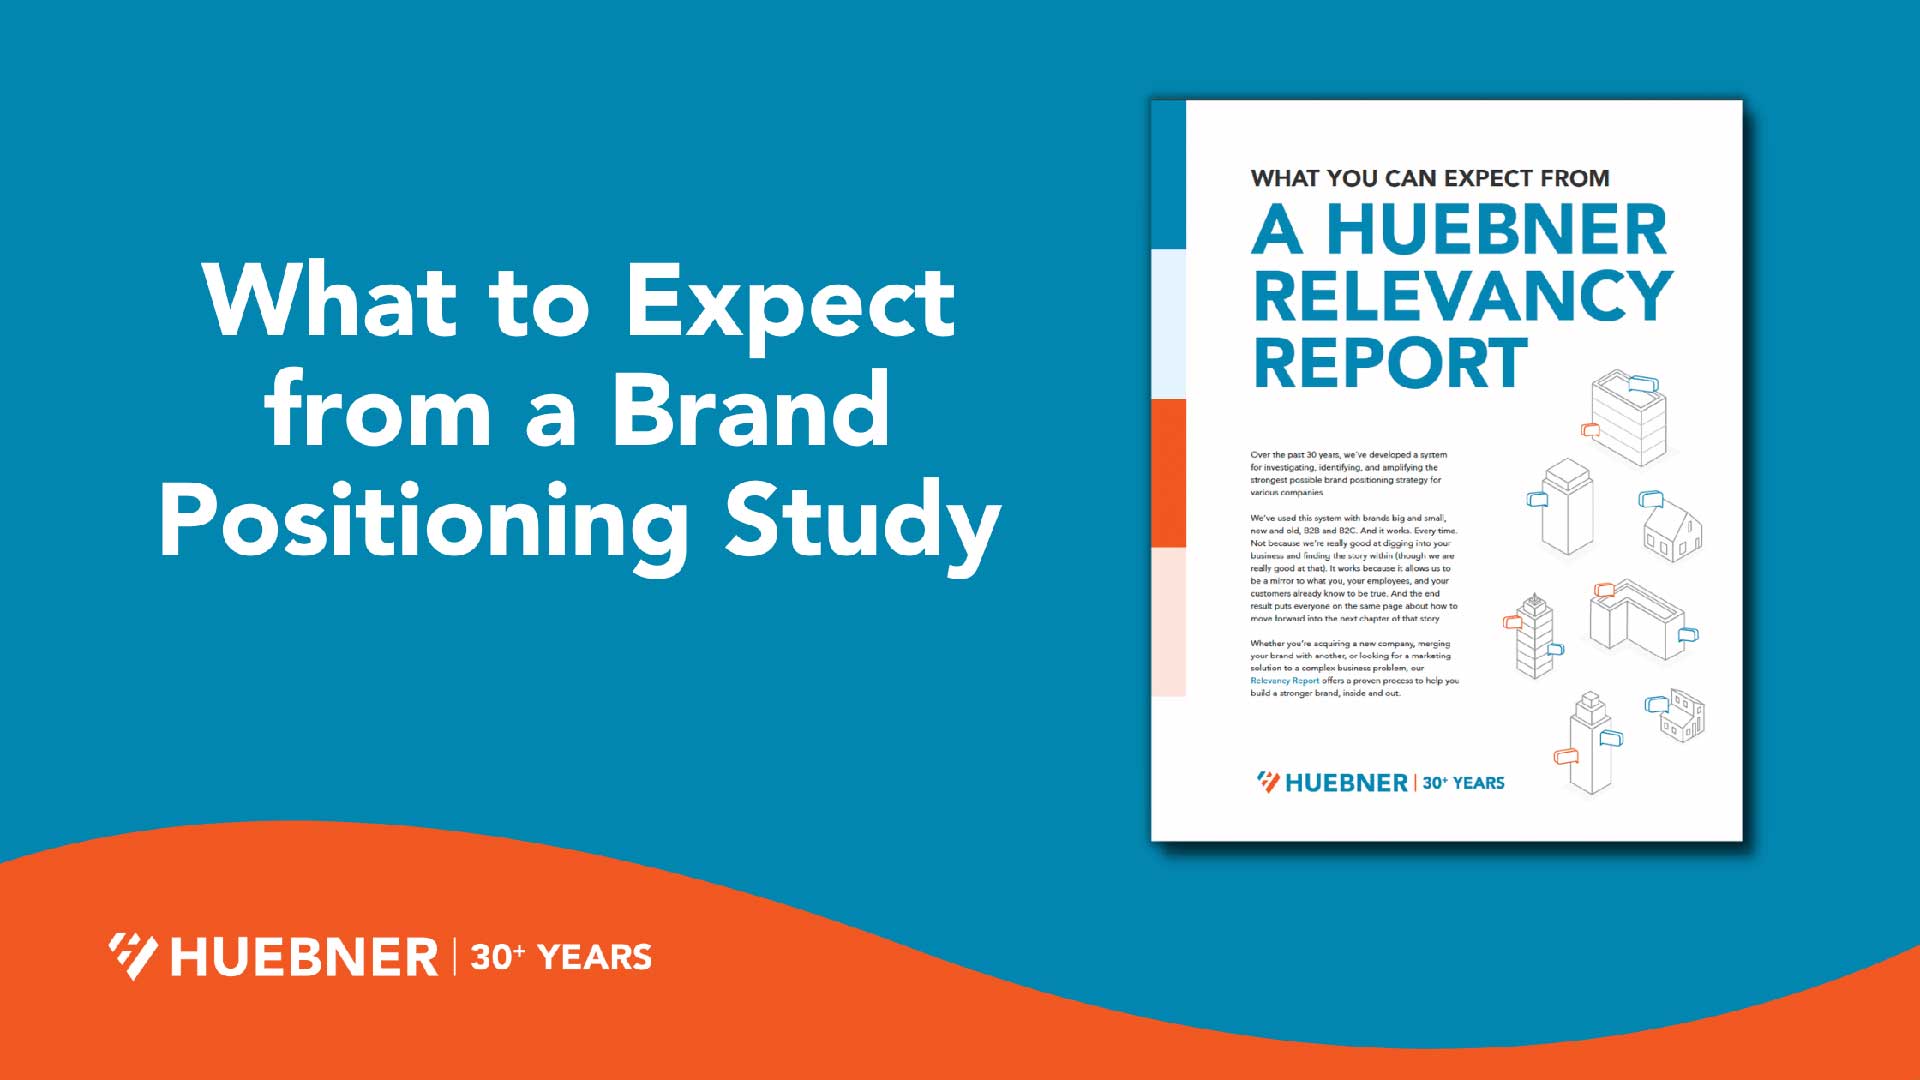 What to Expect from a Brand Positioning Study